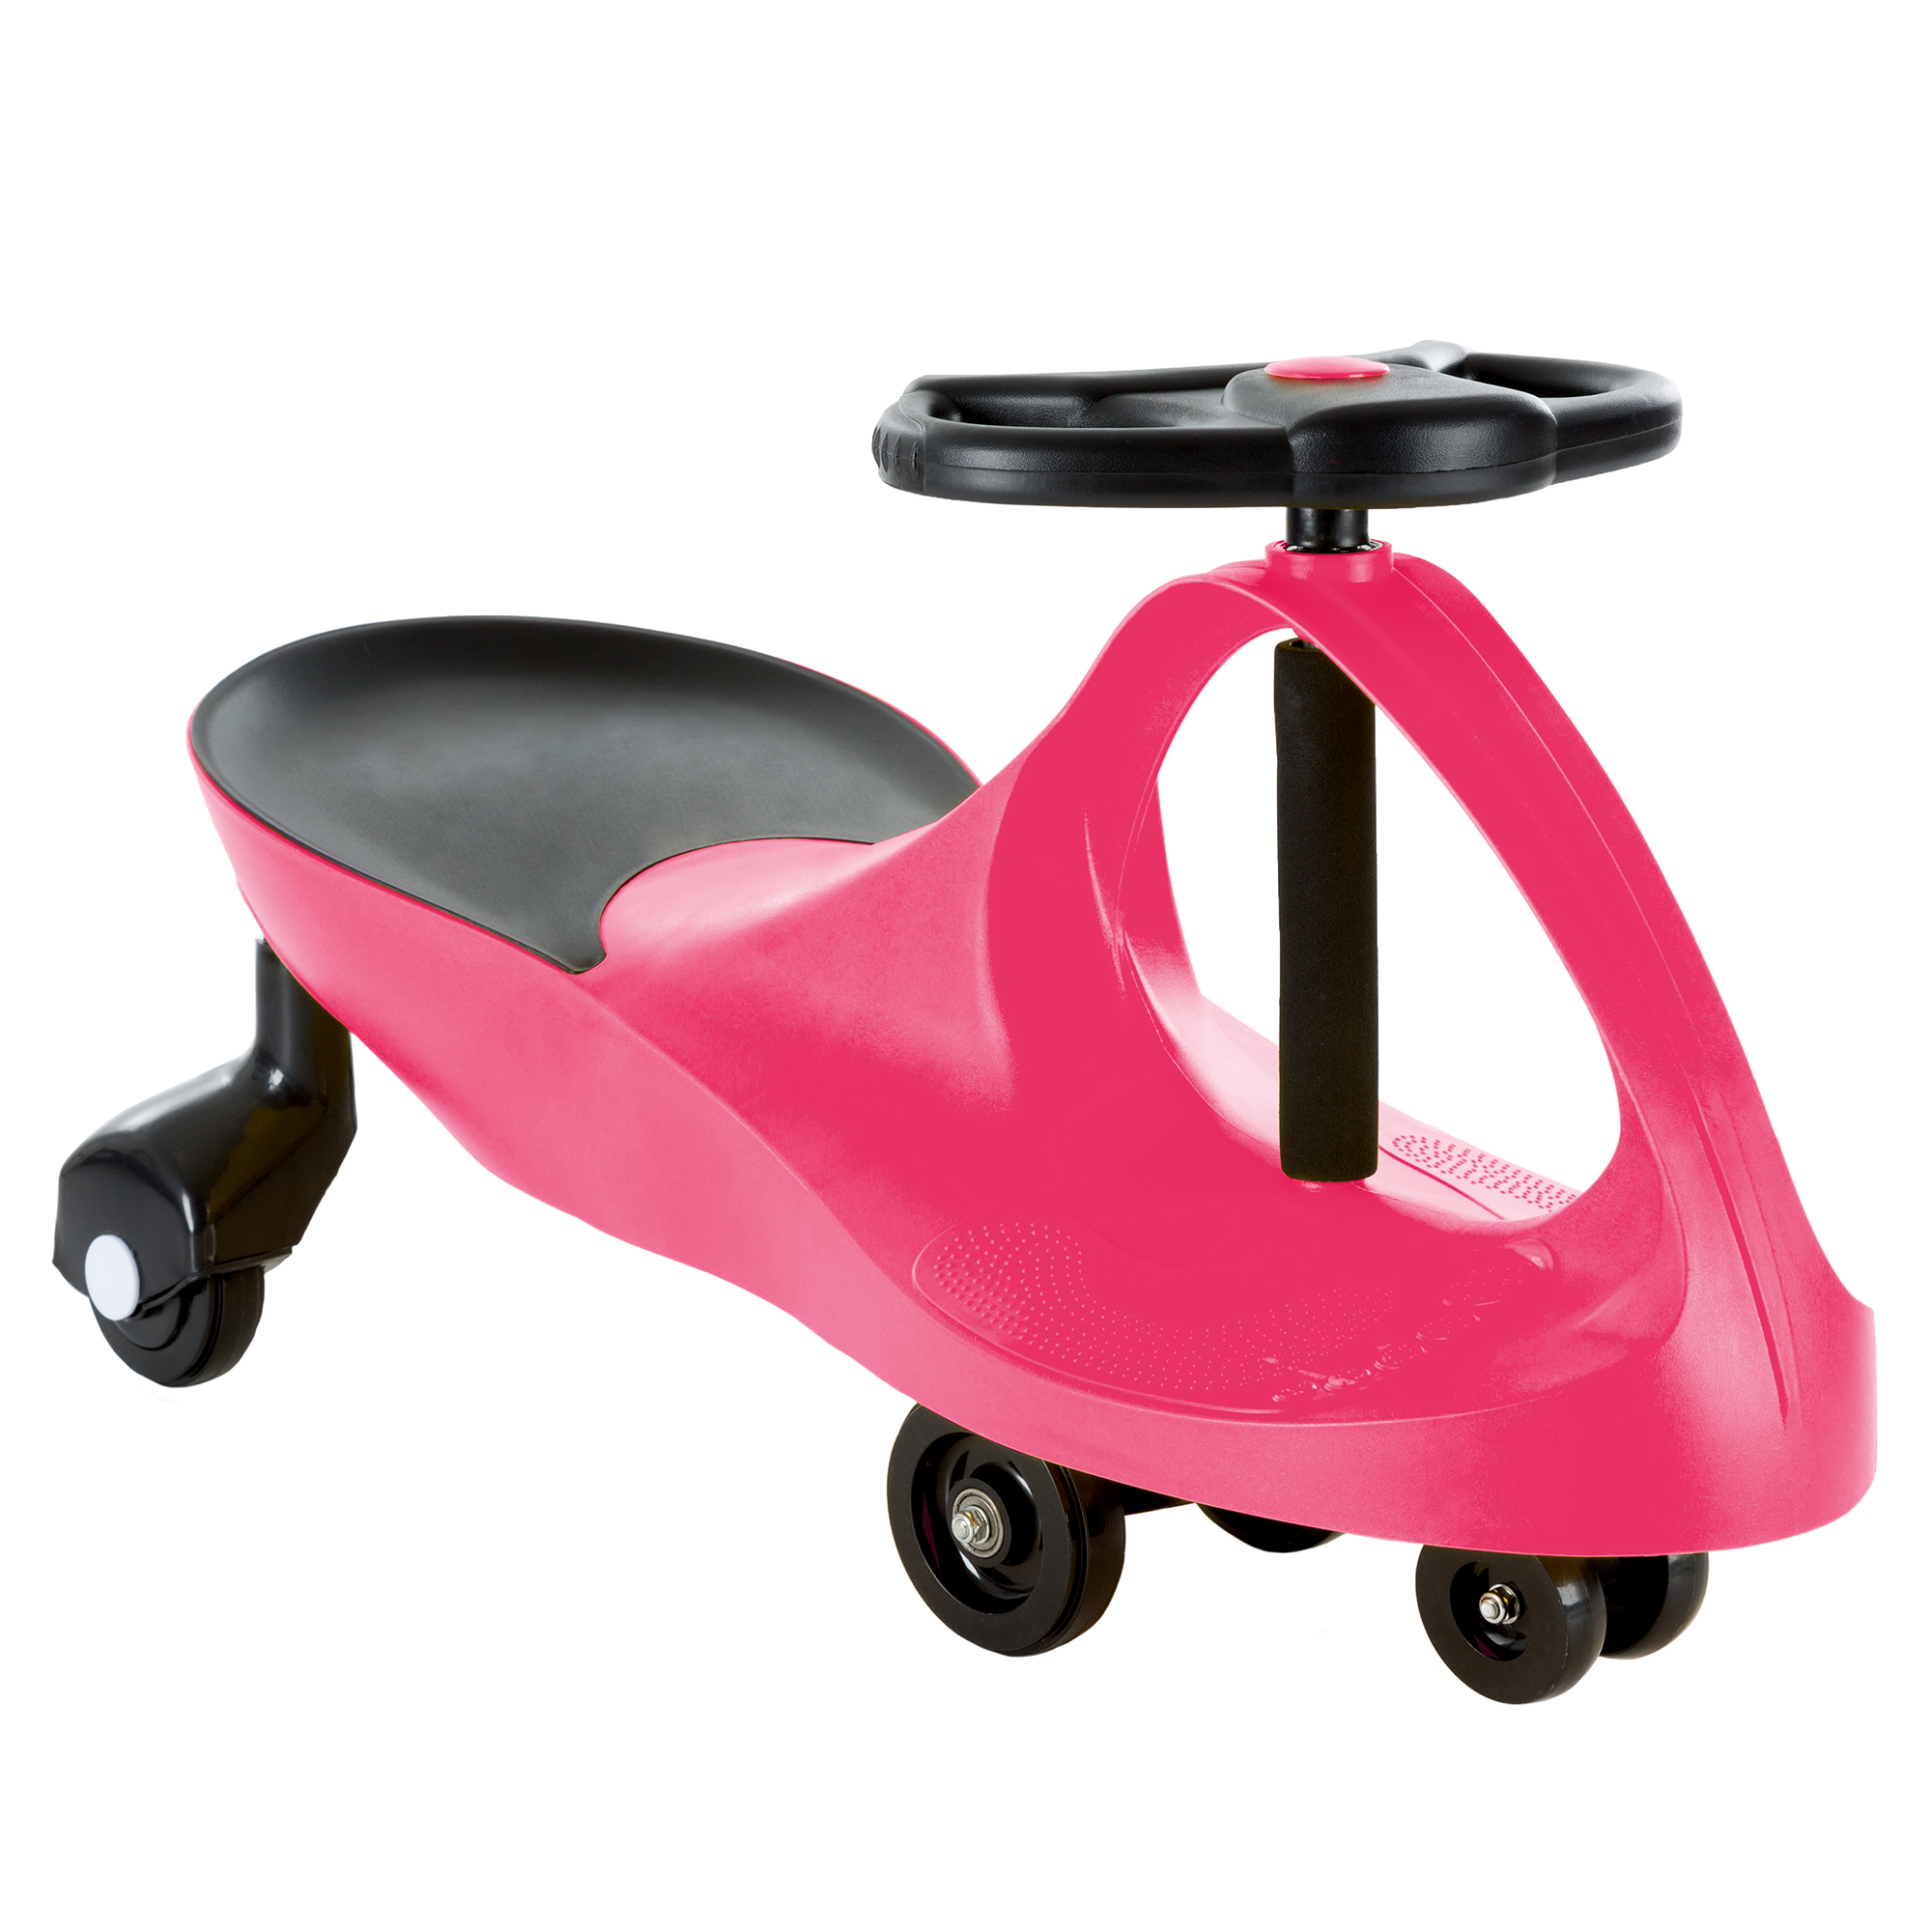 Ride On Toy ZigZag Twistcar Wiggle Steering No Batteries Kids Energy Operated Kids Ages 2 - 6 - Pink